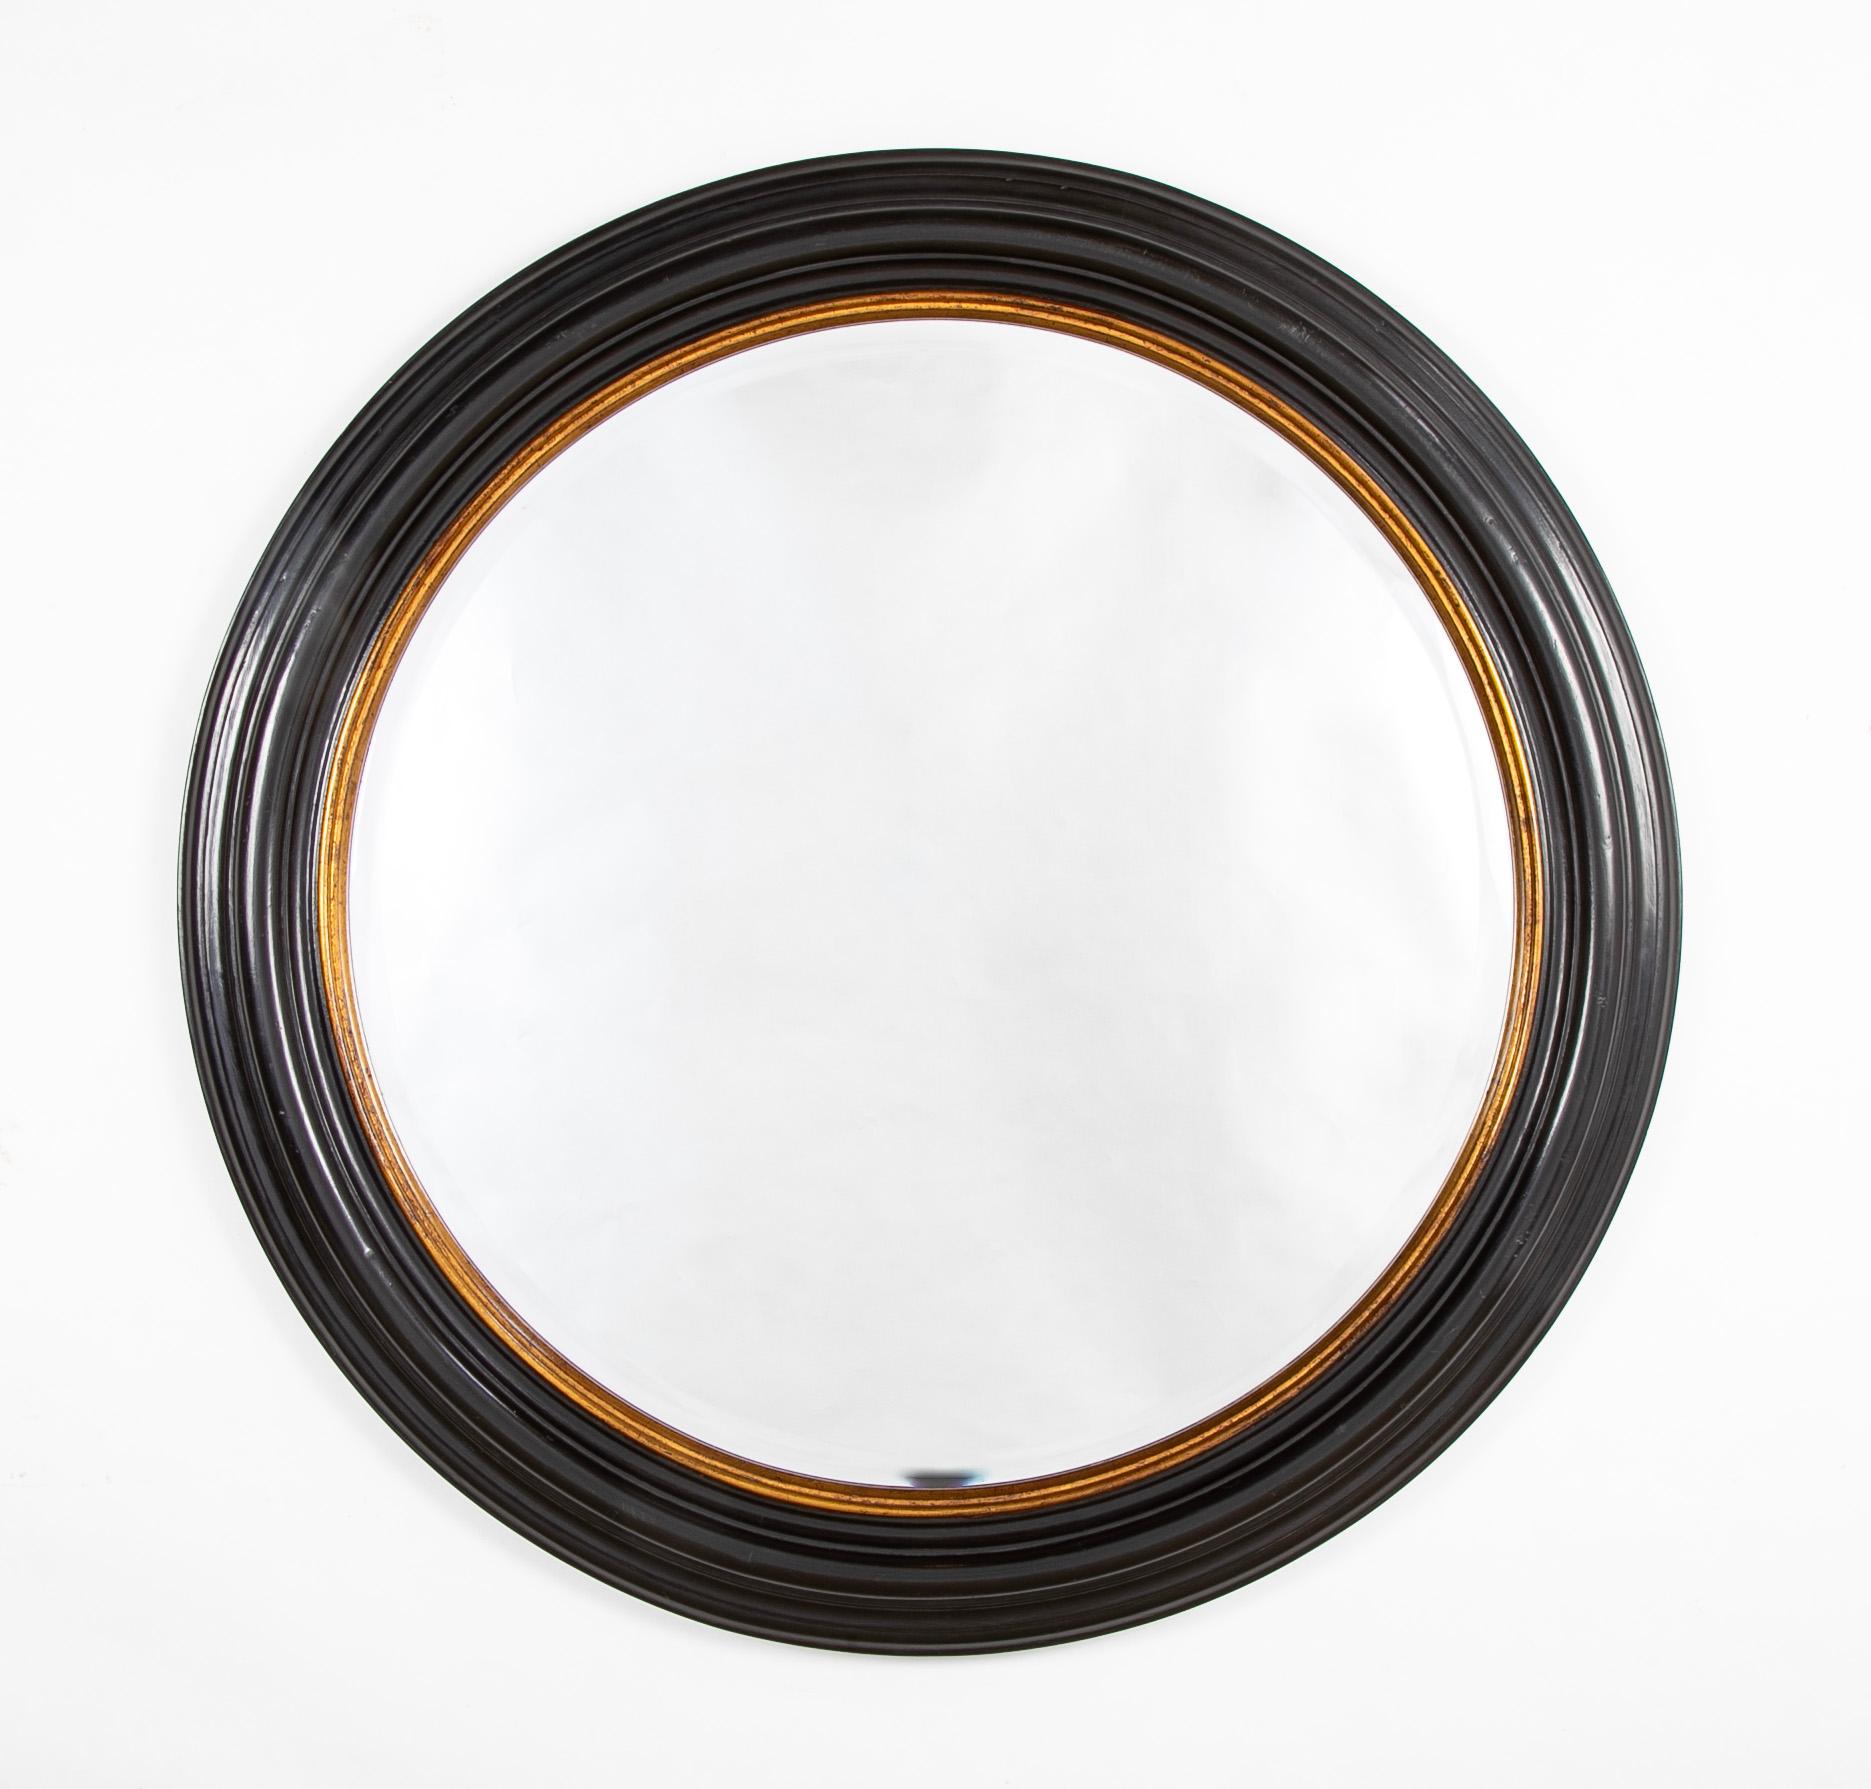 Handsome large scale round English Regency style mirror with lovely shape and gilt inner molding. The mirror glass is beveled. This timeless classic style is a great match for any interior, wonderful over a mantel, or entry way console table, or